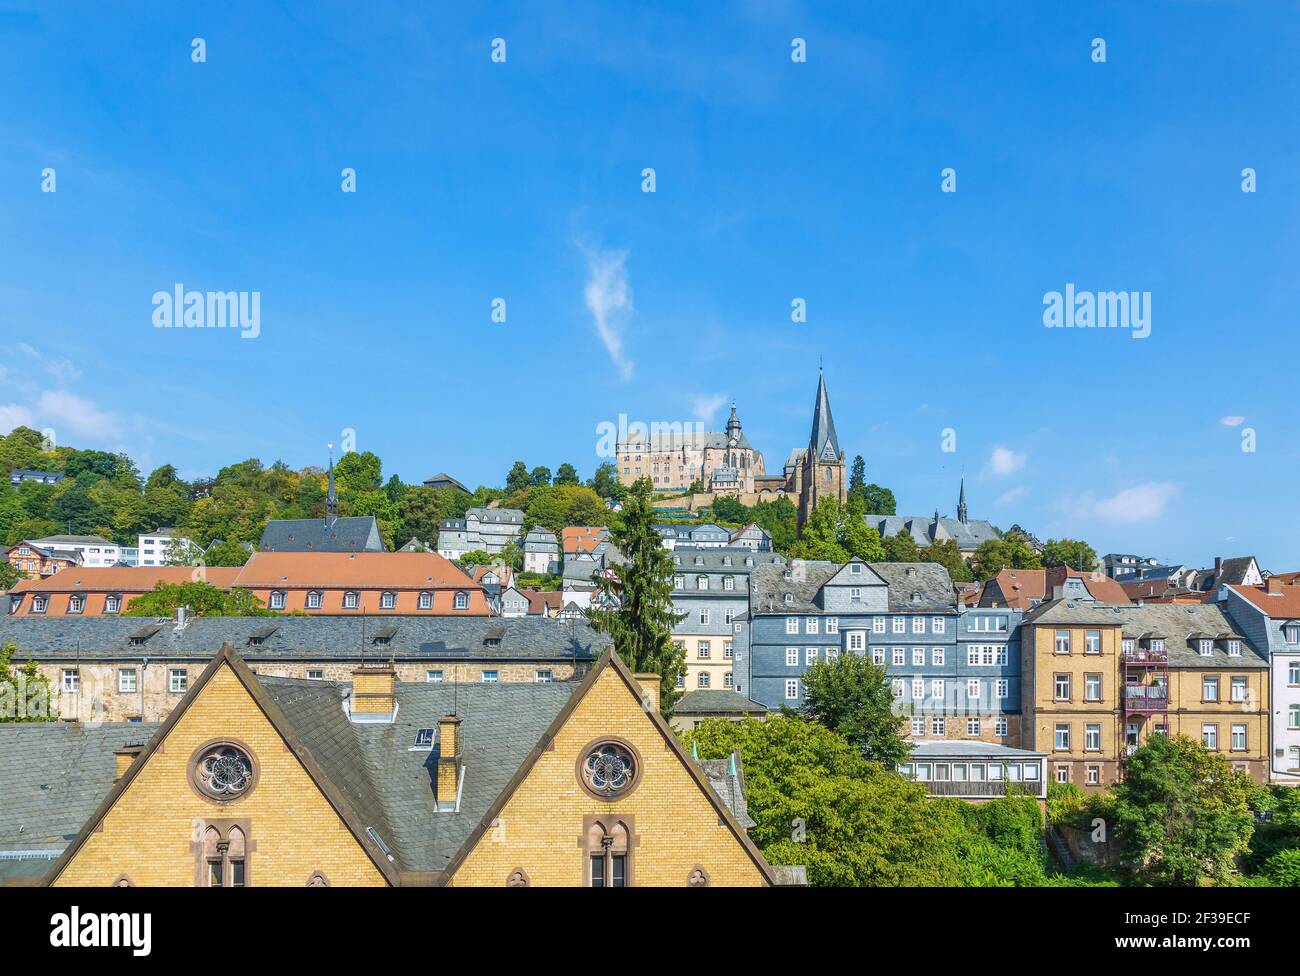 geography / travel, Germany, Hesse, Marburg, Marburg at the Lahn, city view with landgrave's castle an, Additional-Rights-Clearance-Info-Not-Available Stock Photo